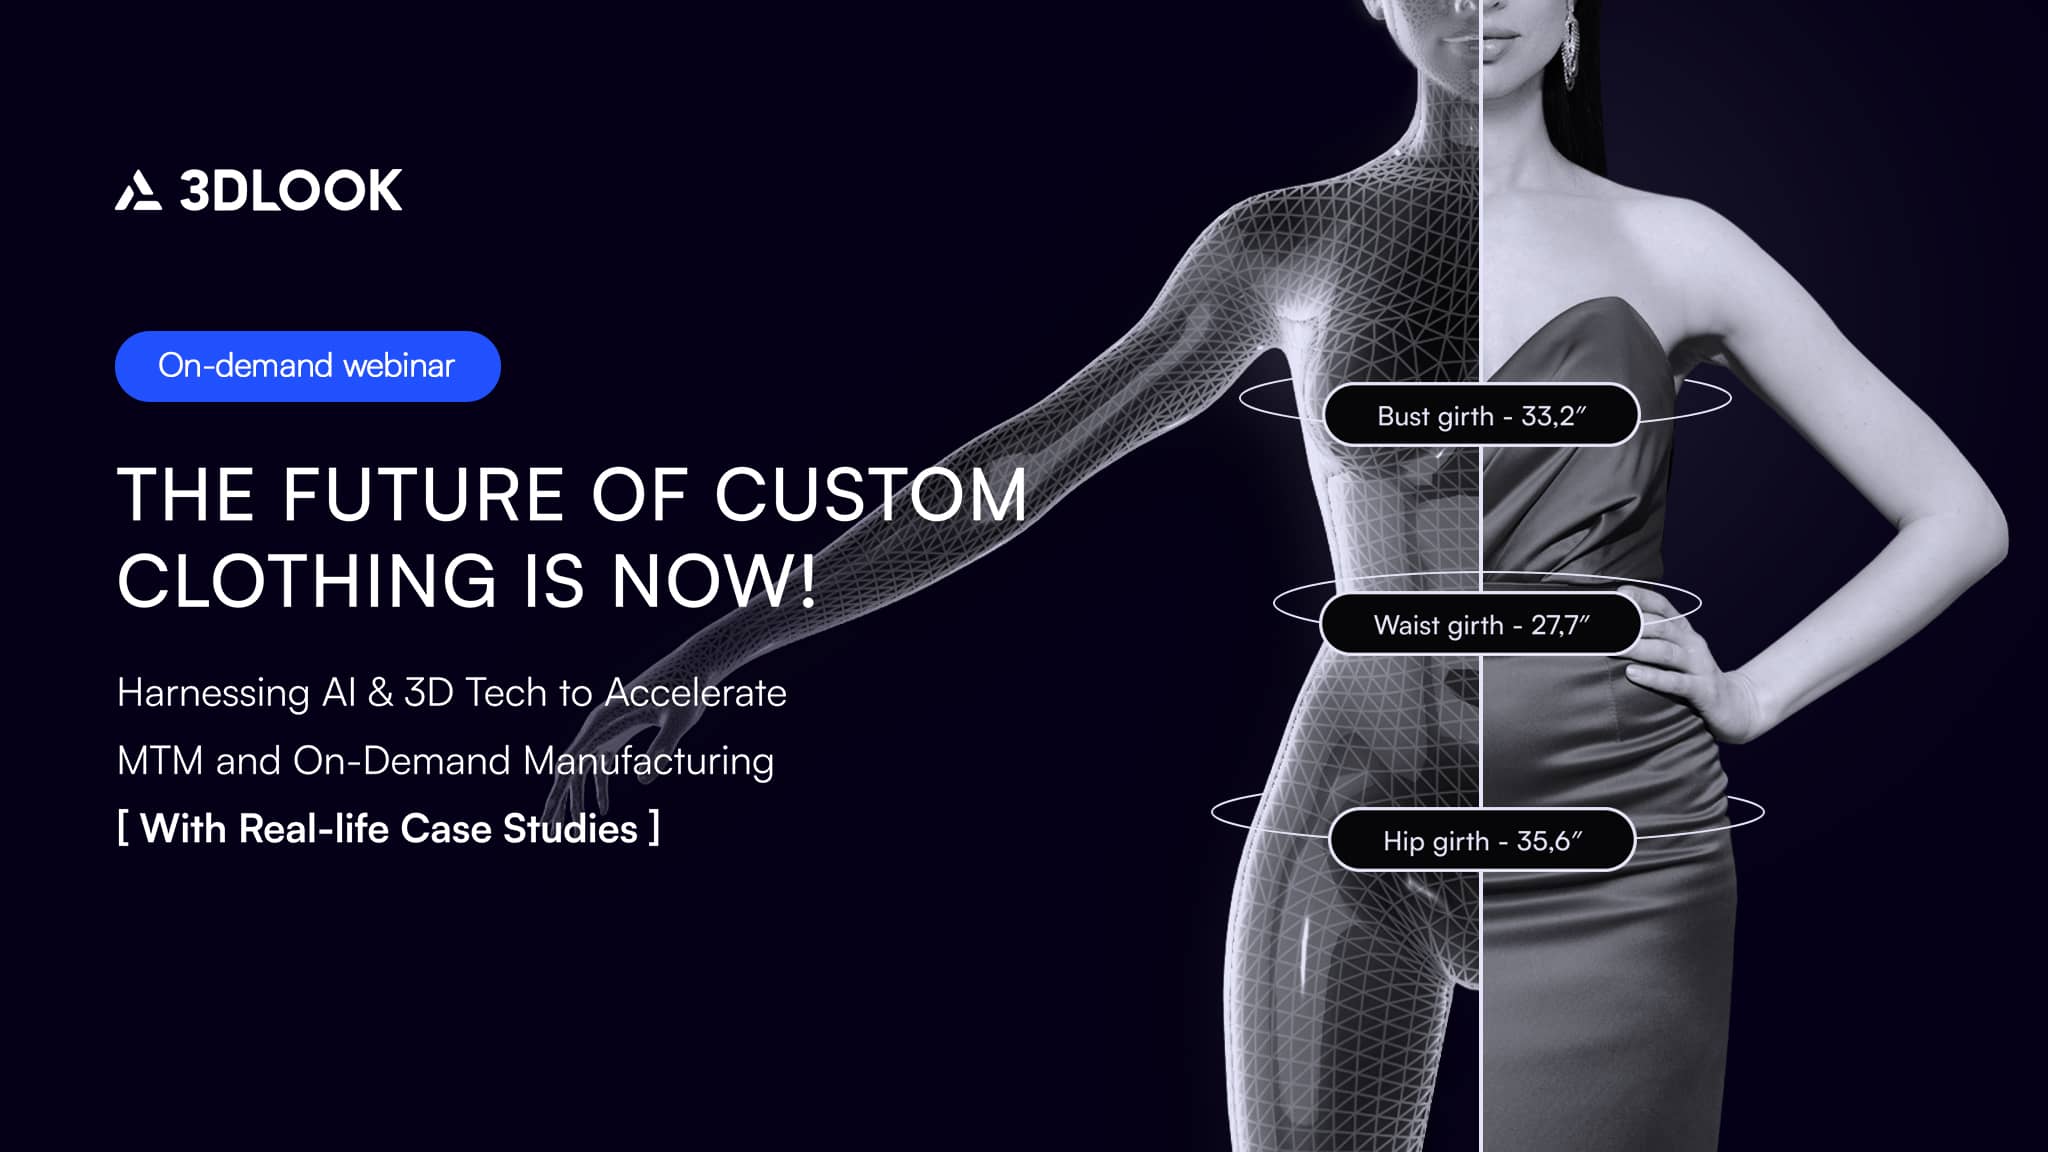 The future of custom clothing is now with precise body measurements and accuracy.